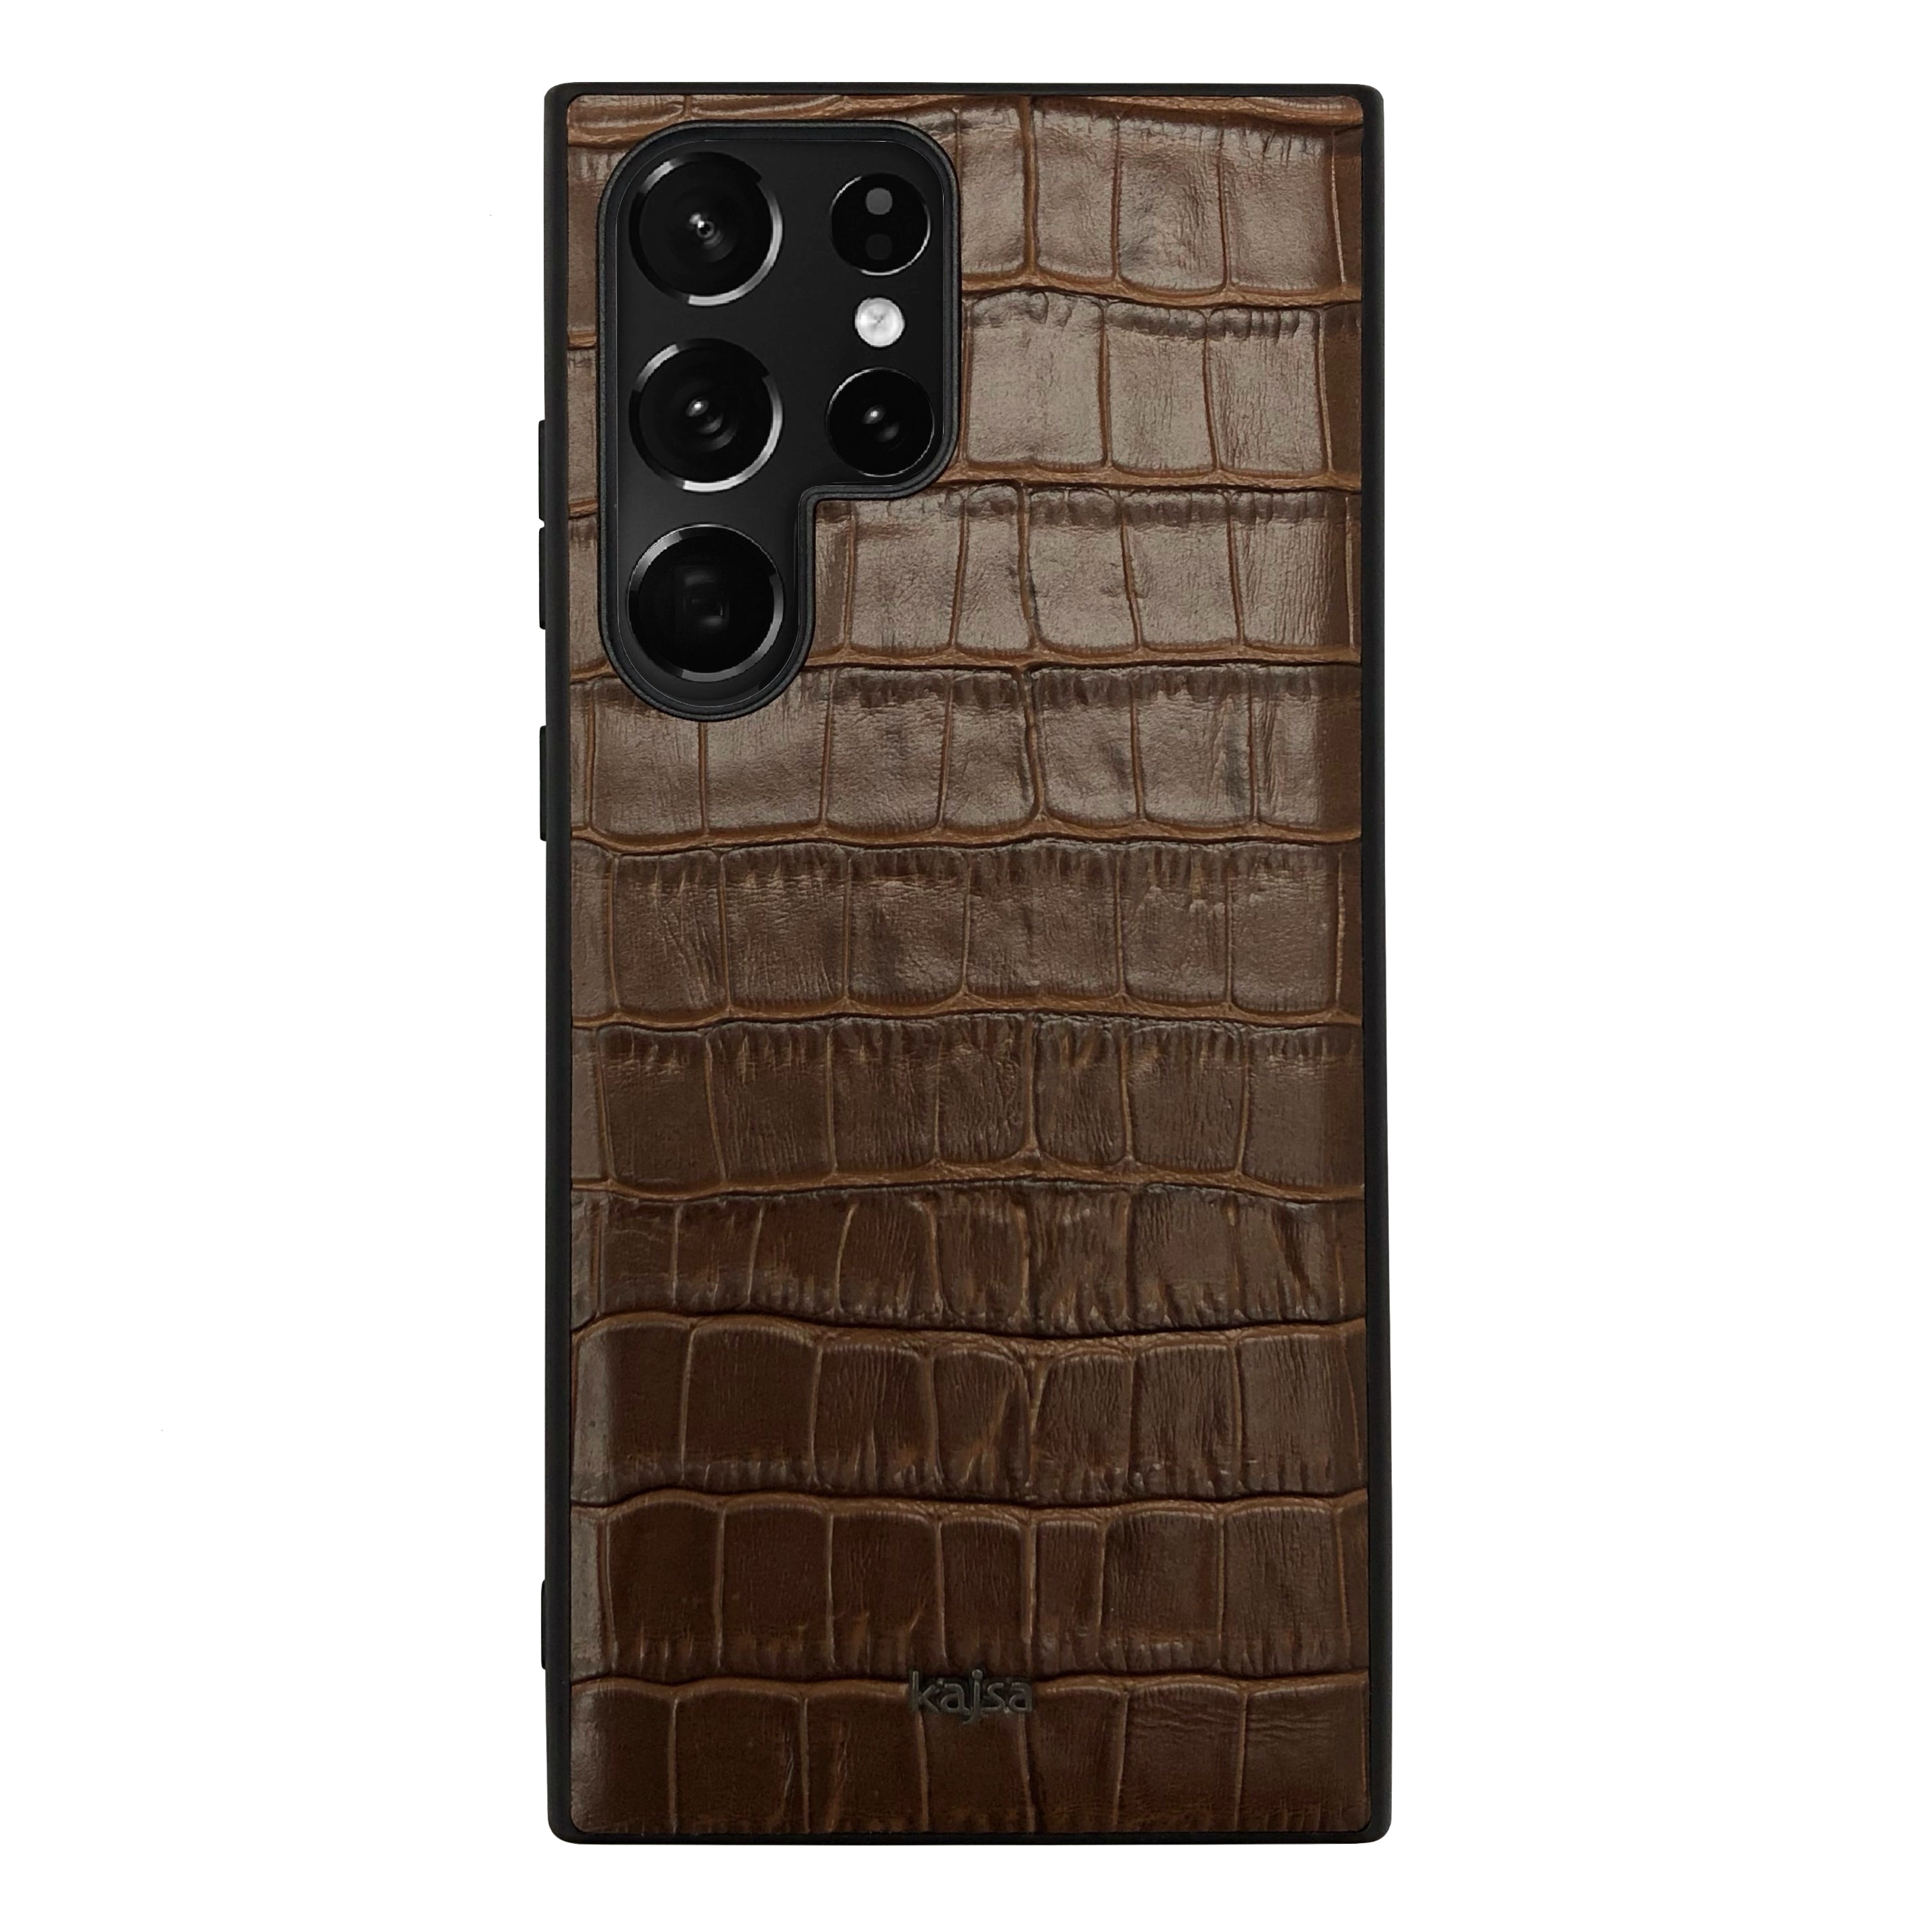 Neo Classic Collection - Genuine Croco Pattern Leather Back Case for Samsung Galaxy S23/S23+/S23 Ultra-Phone Case- phone case - phone cases- phone cover- iphone cover- iphone case- iphone cases- leather case- leather cases- DIYCASE - custom case - leather cover - hand strap case - croco pattern case - snake pattern case - carbon fiber phone case - phone case brand - unique phone case - high quality - phone case brand - protective case - buy phone case hong kong - online buy phone case - iphone‎手機殼 - 客製化手機殼 